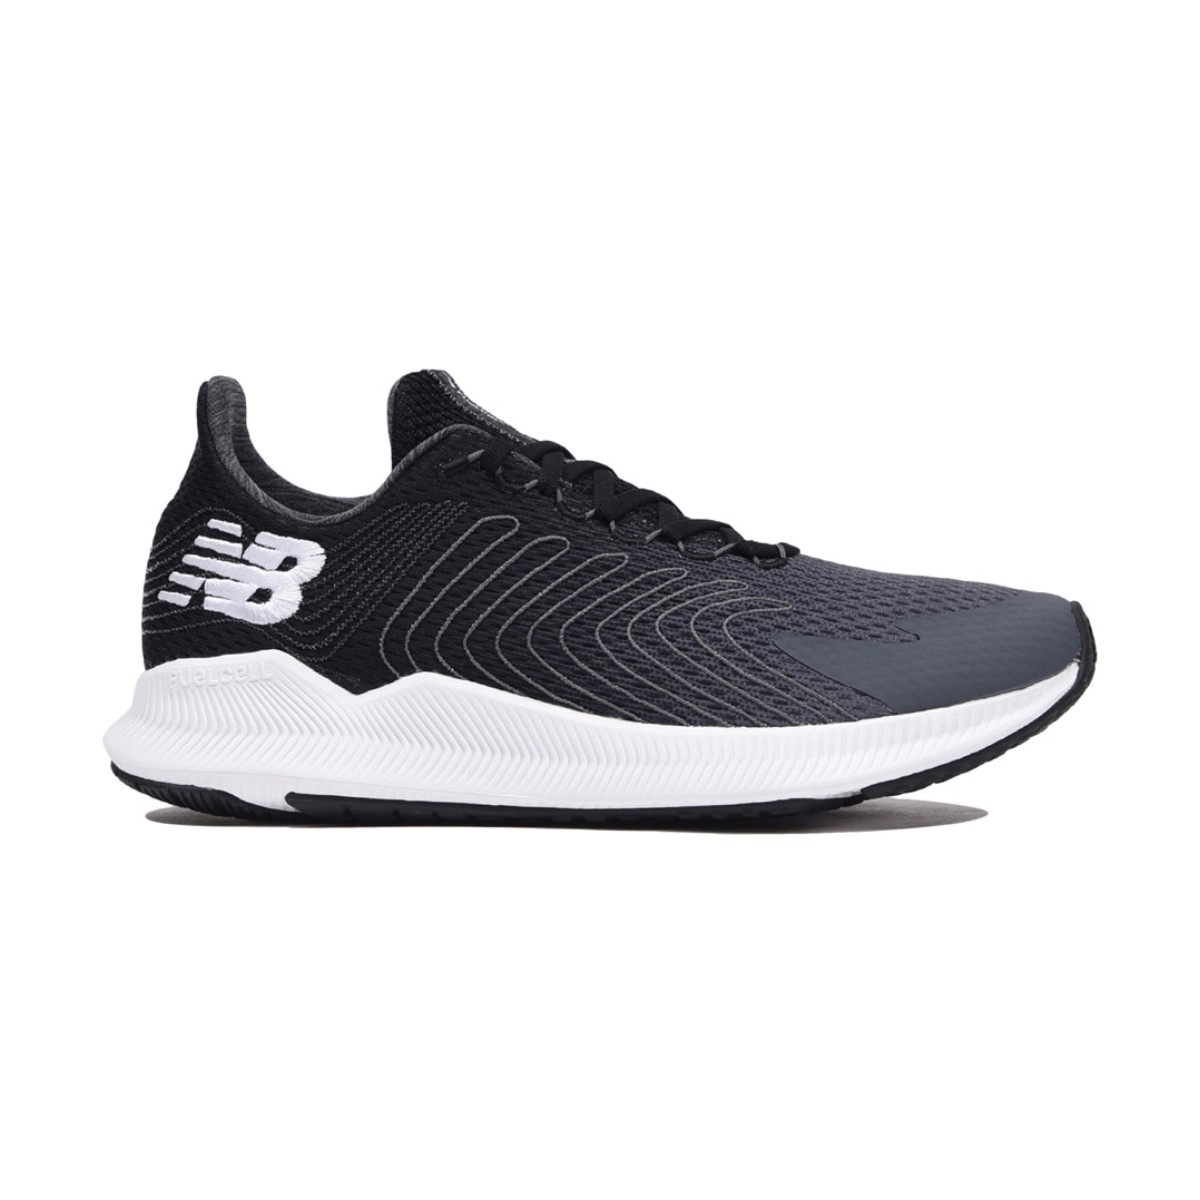 New Balance FuelCell Propel Shoes Gray Black